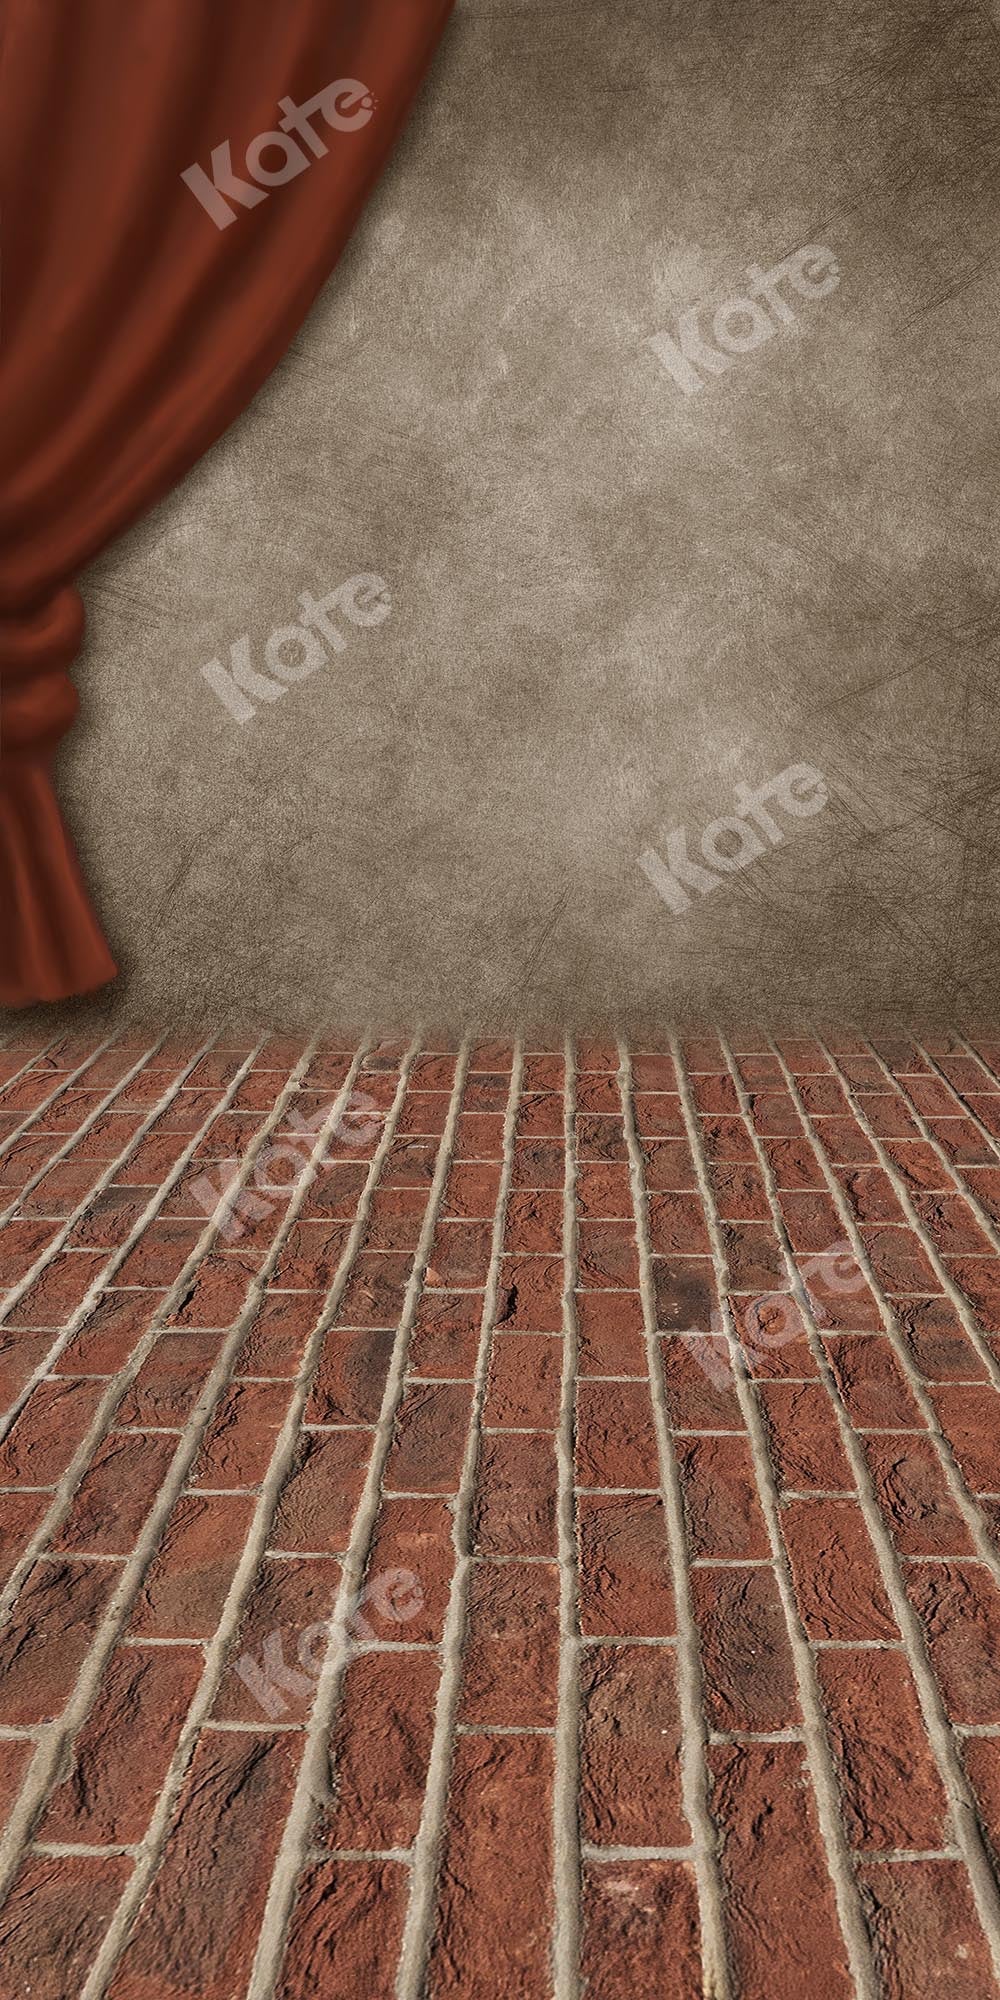 Kate Sweep Retro Stage Brick Floor Backdrop Designed by Chain Photography